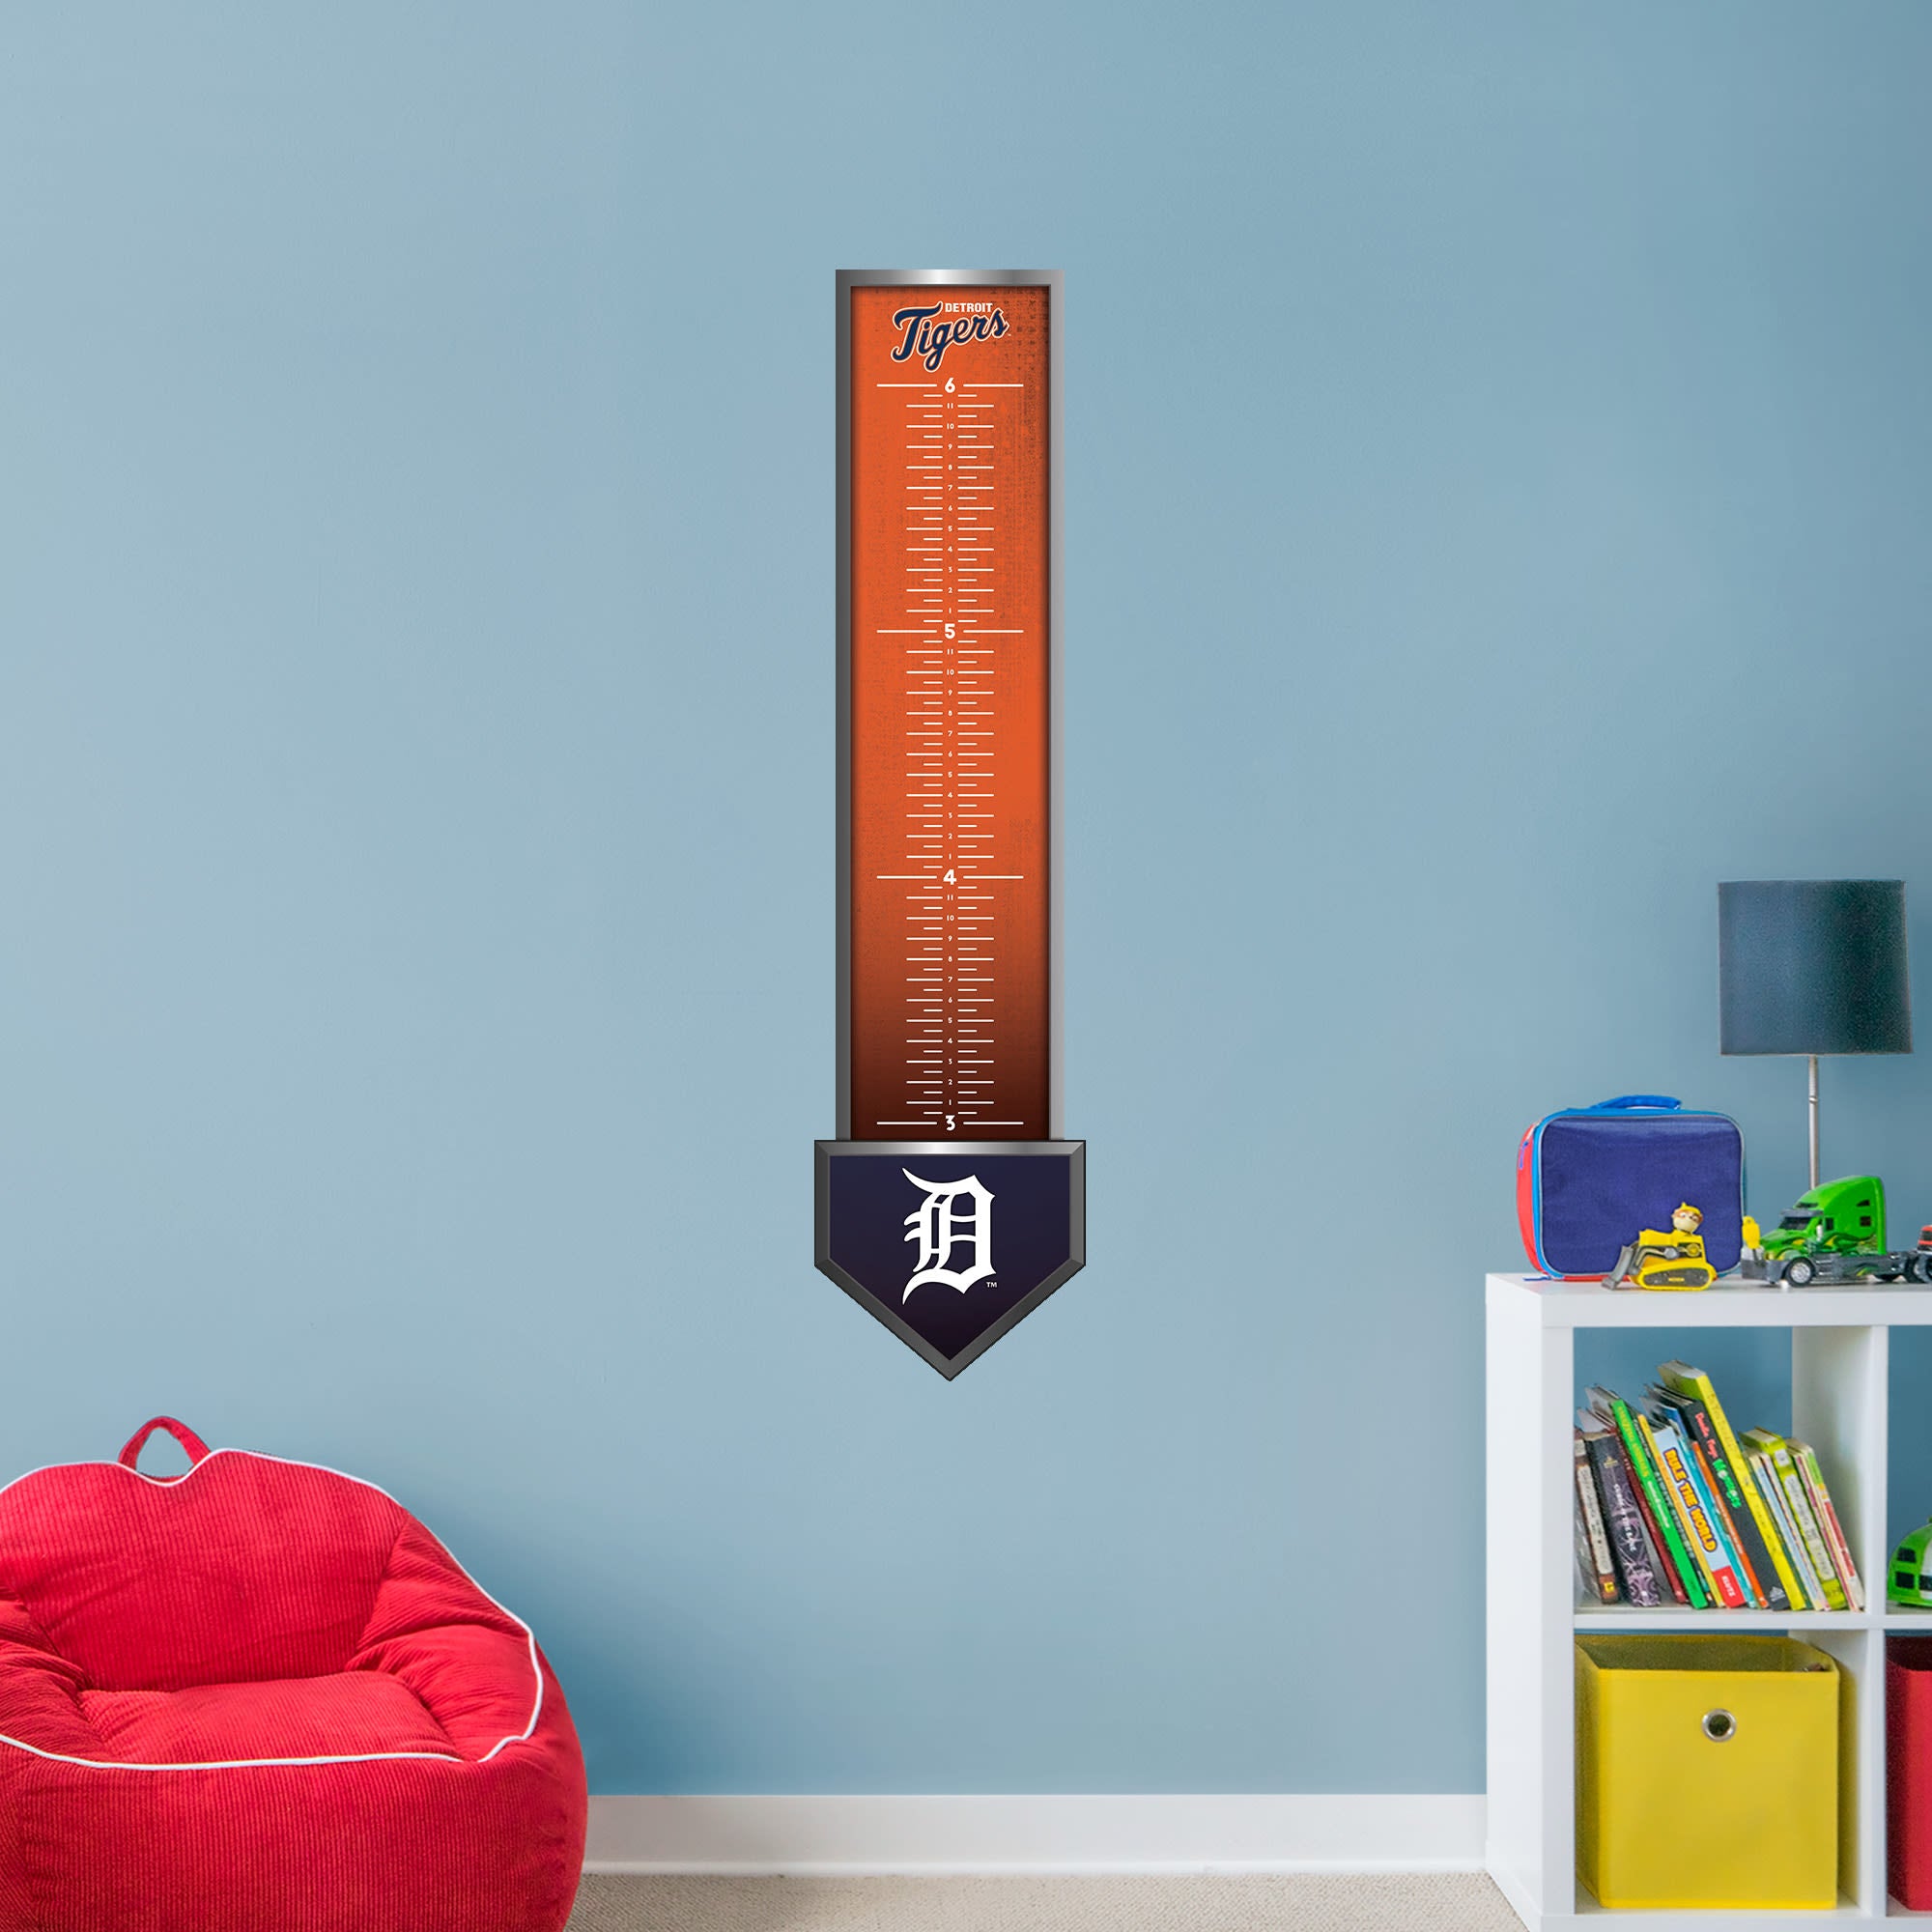 Detroit Tigers: Growth Chart - Officially Licensed MLB Removable Wall Graphic 13.0"W x 54.0"H by Fathead | Vinyl